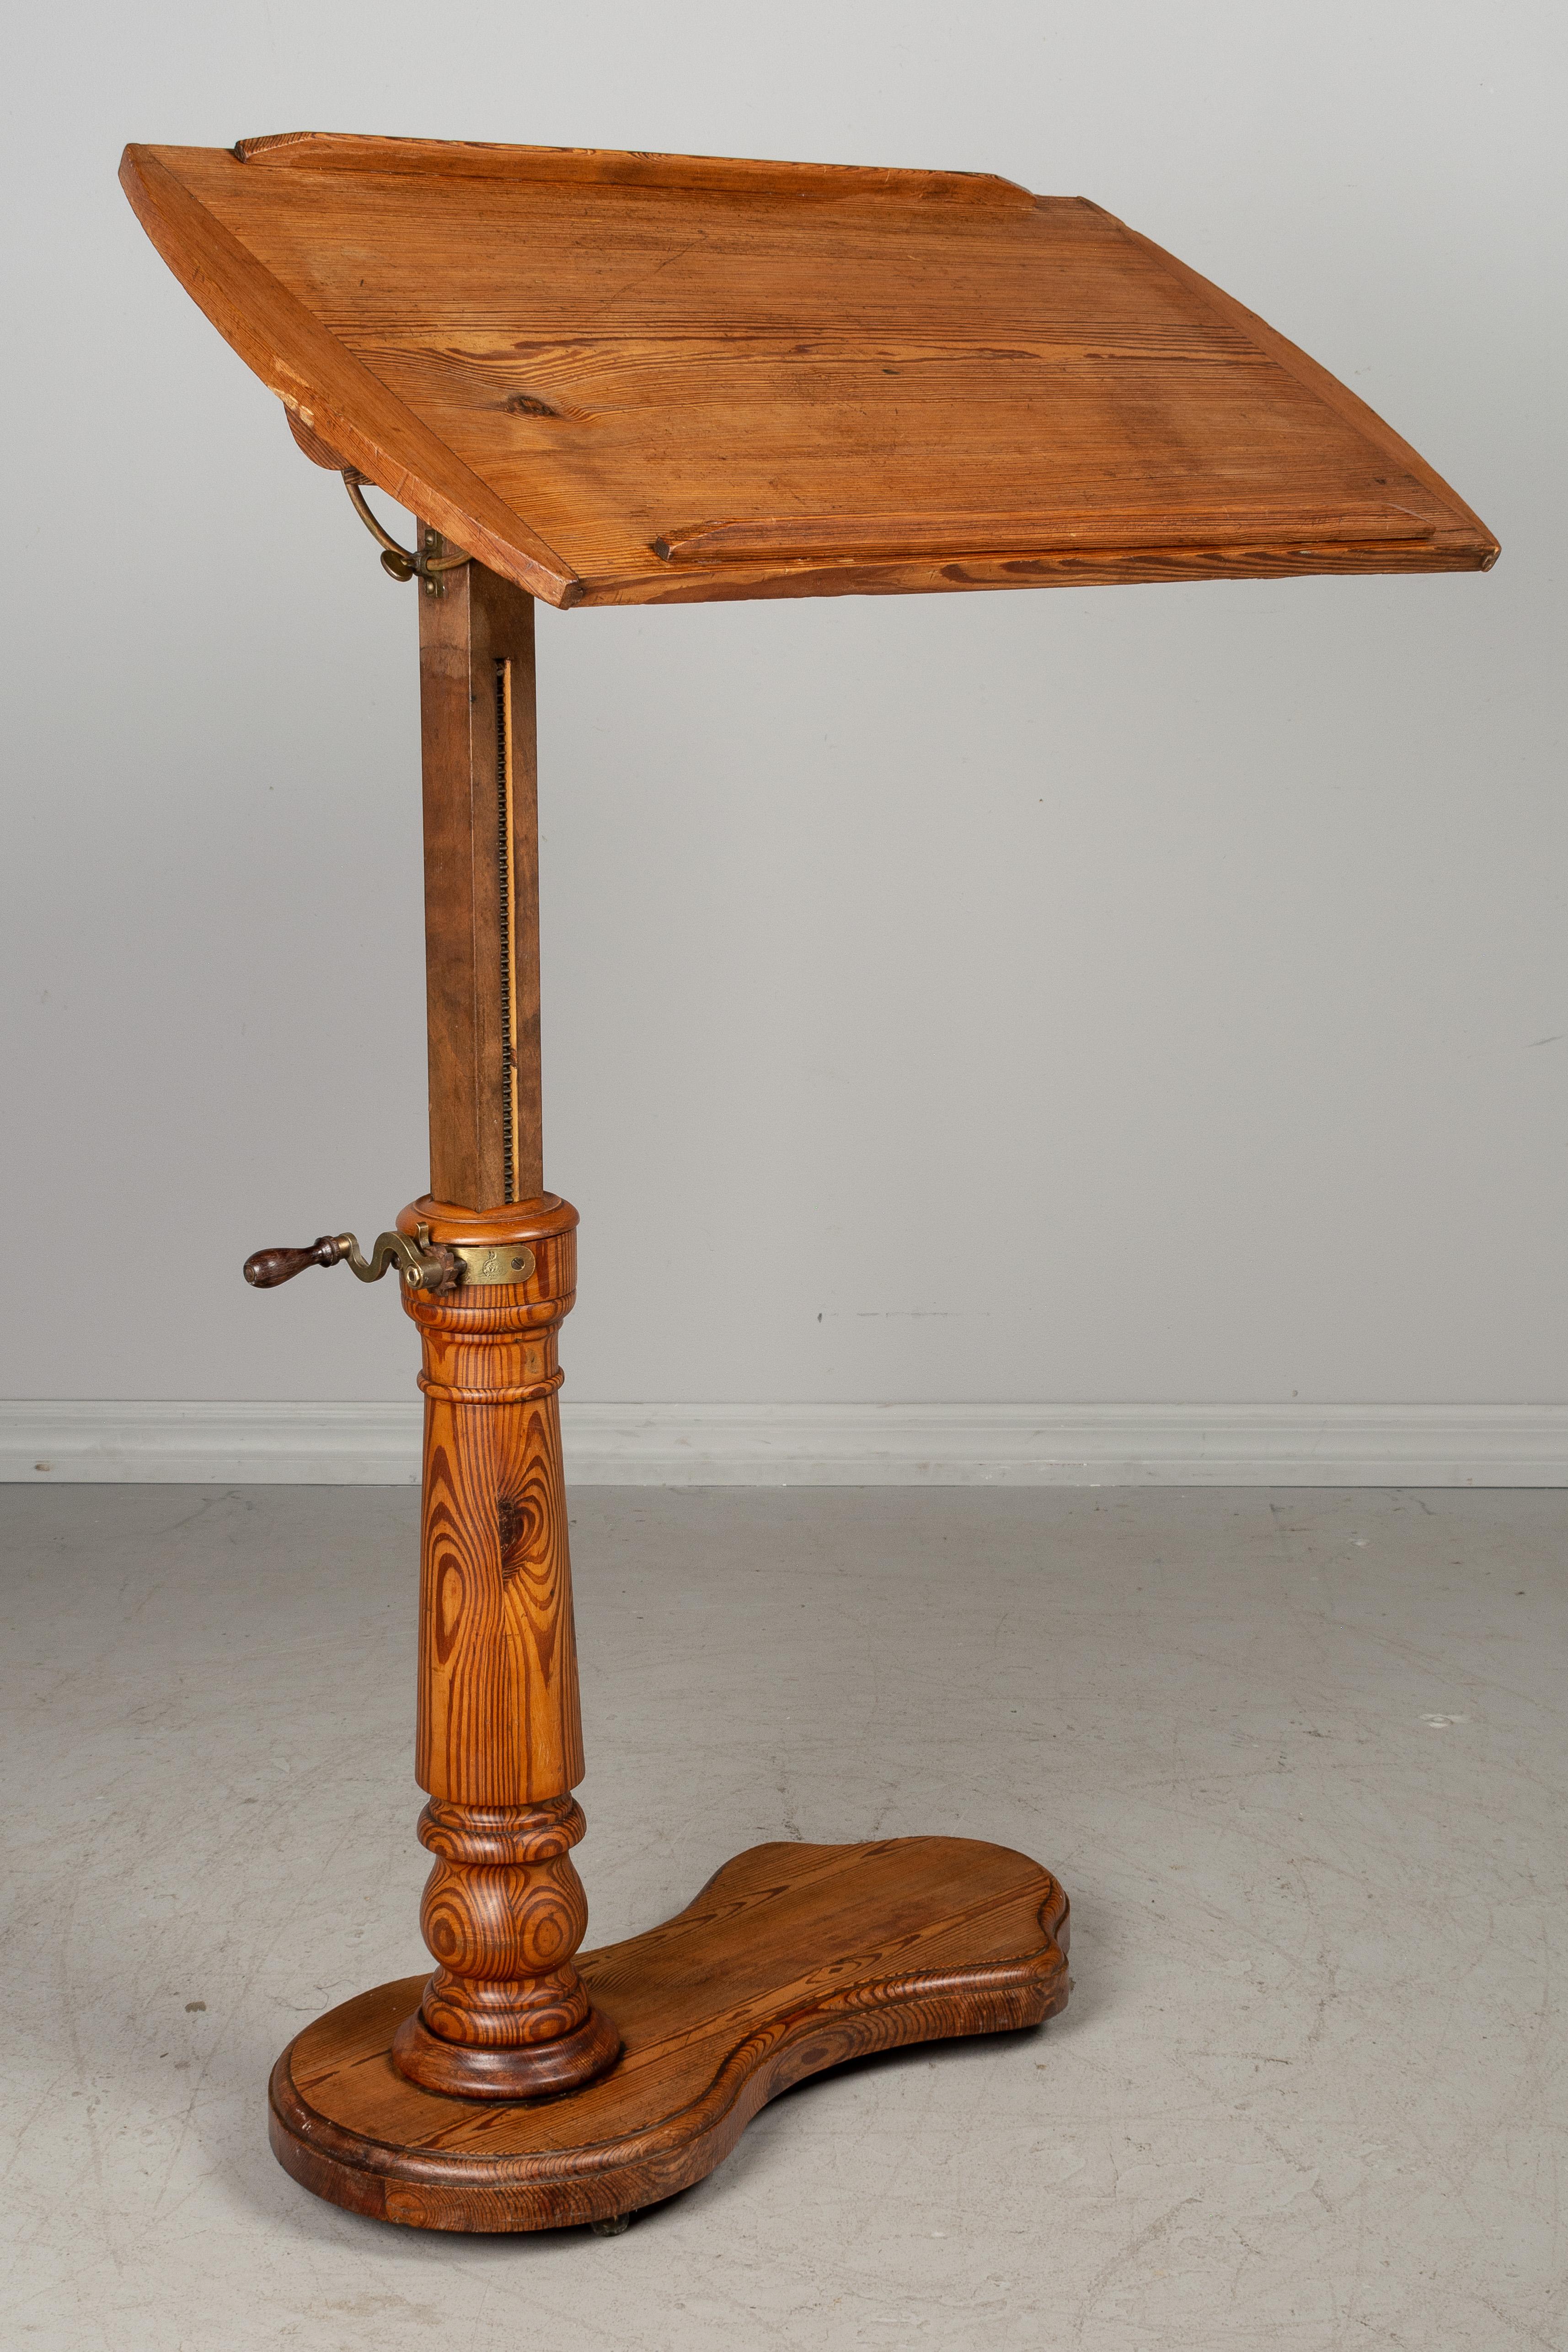 French Provincial 19th Century French Adjustable Tilt-Top Tray Table